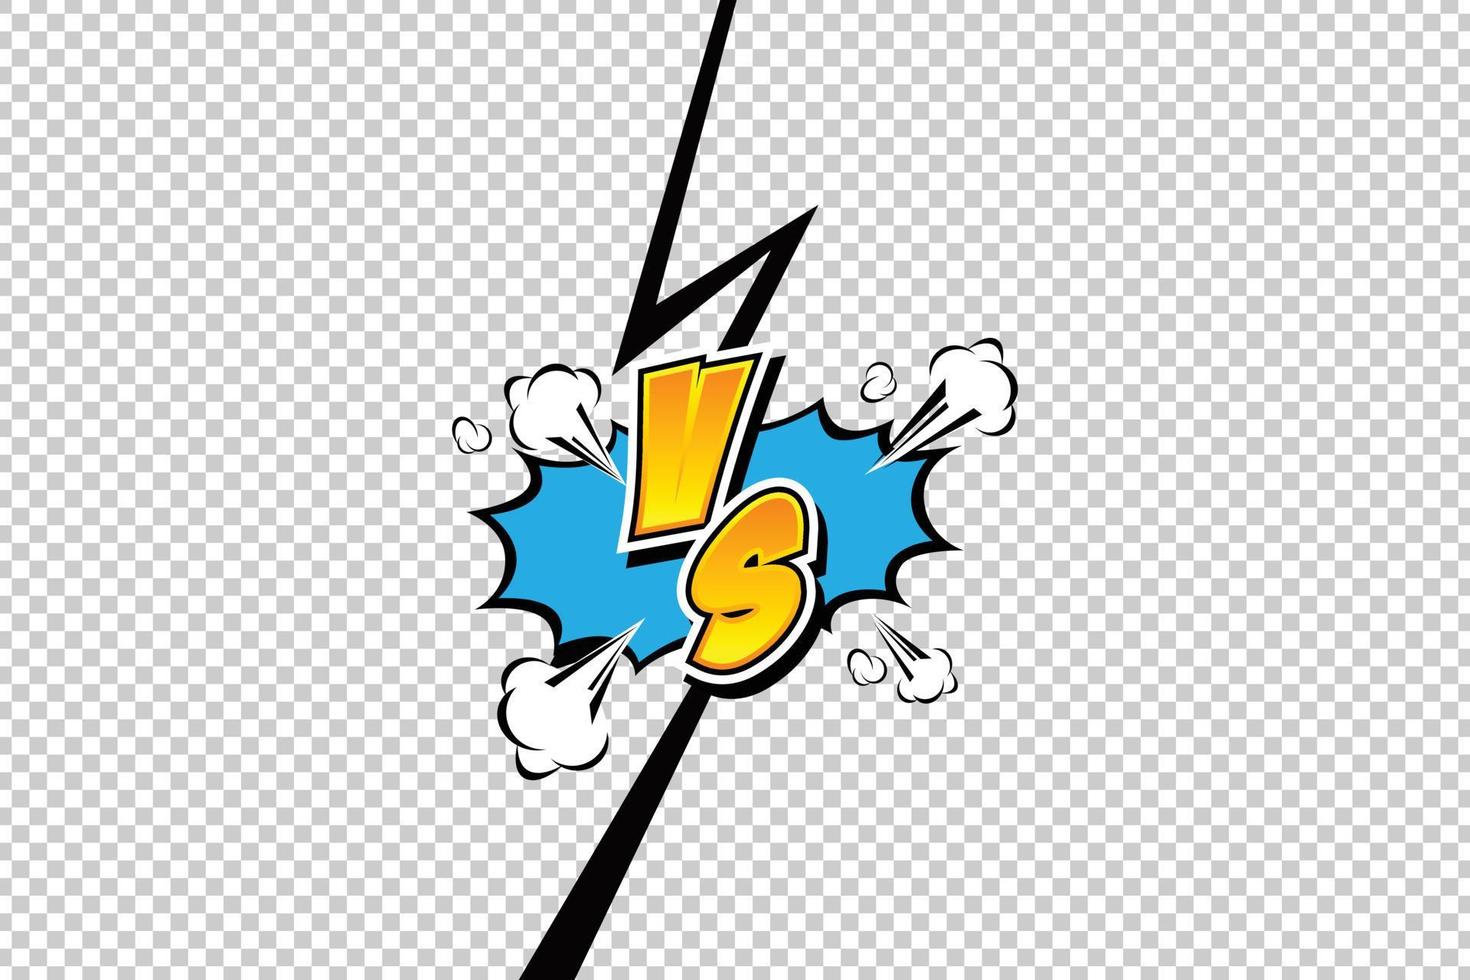 Fight backgrounds comics style design. Vector illustration